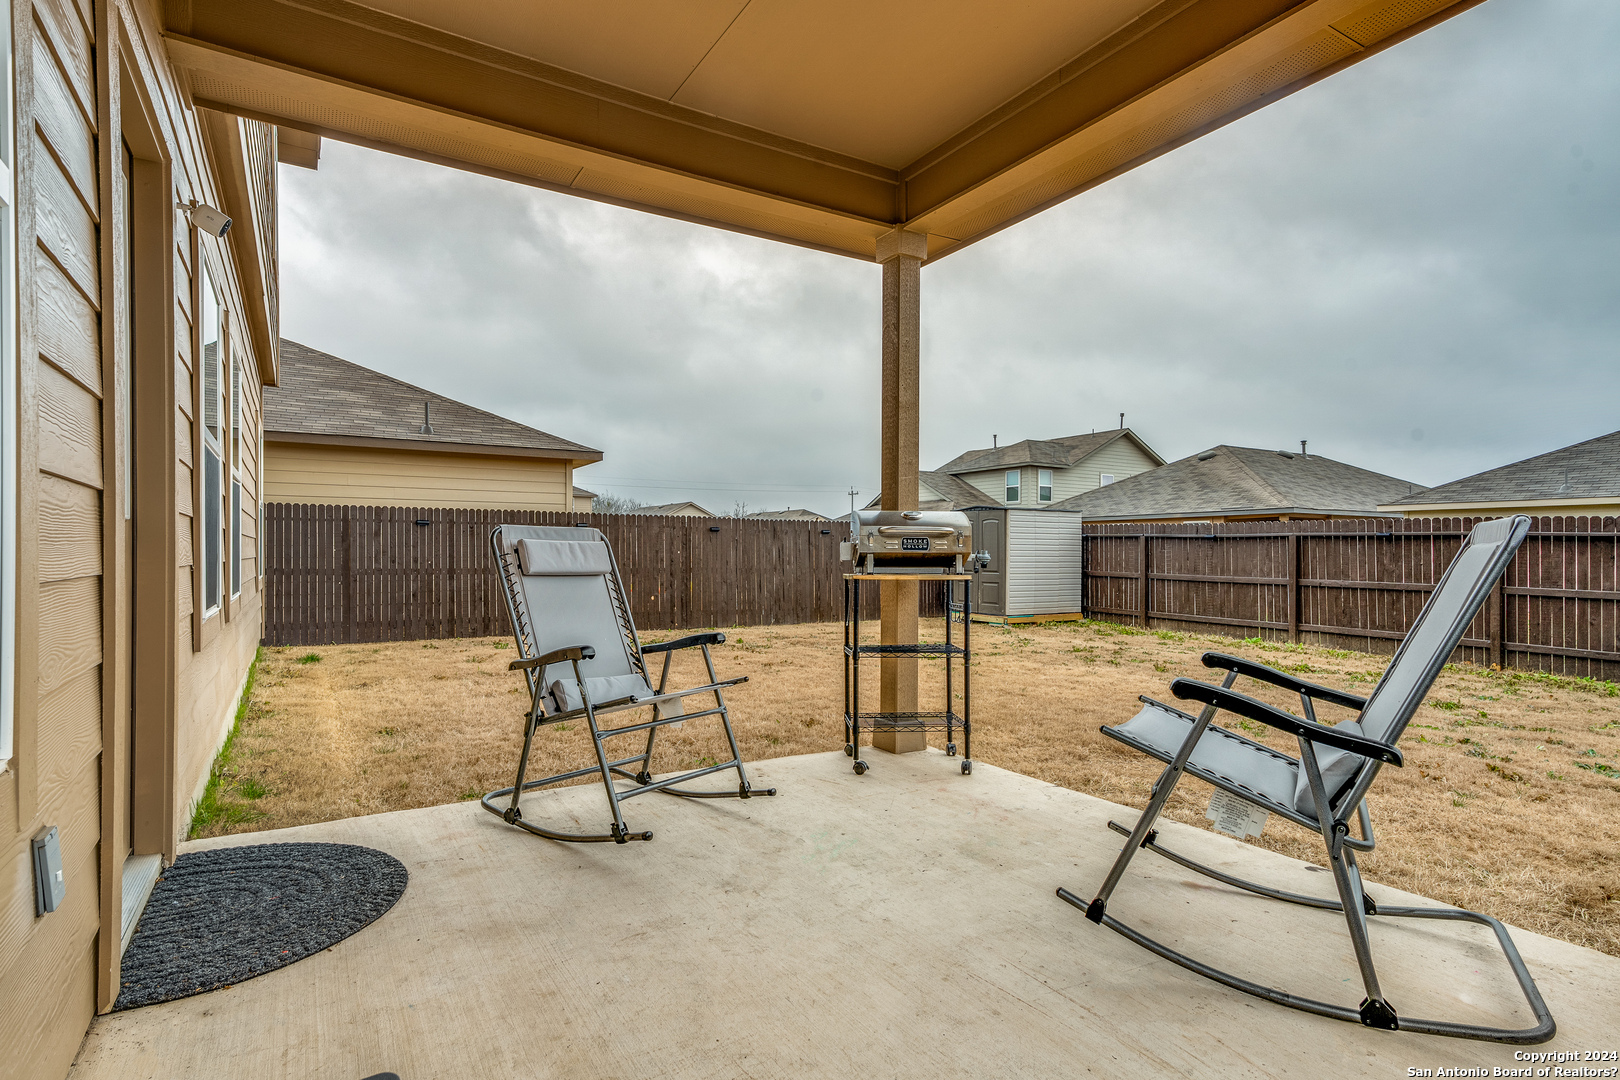 If you have additional questions regarding 9914 Tupelo Hollow  in San Antonio or would like to tour the property with us call 800-660-1022 and reference MLS# 1750961.